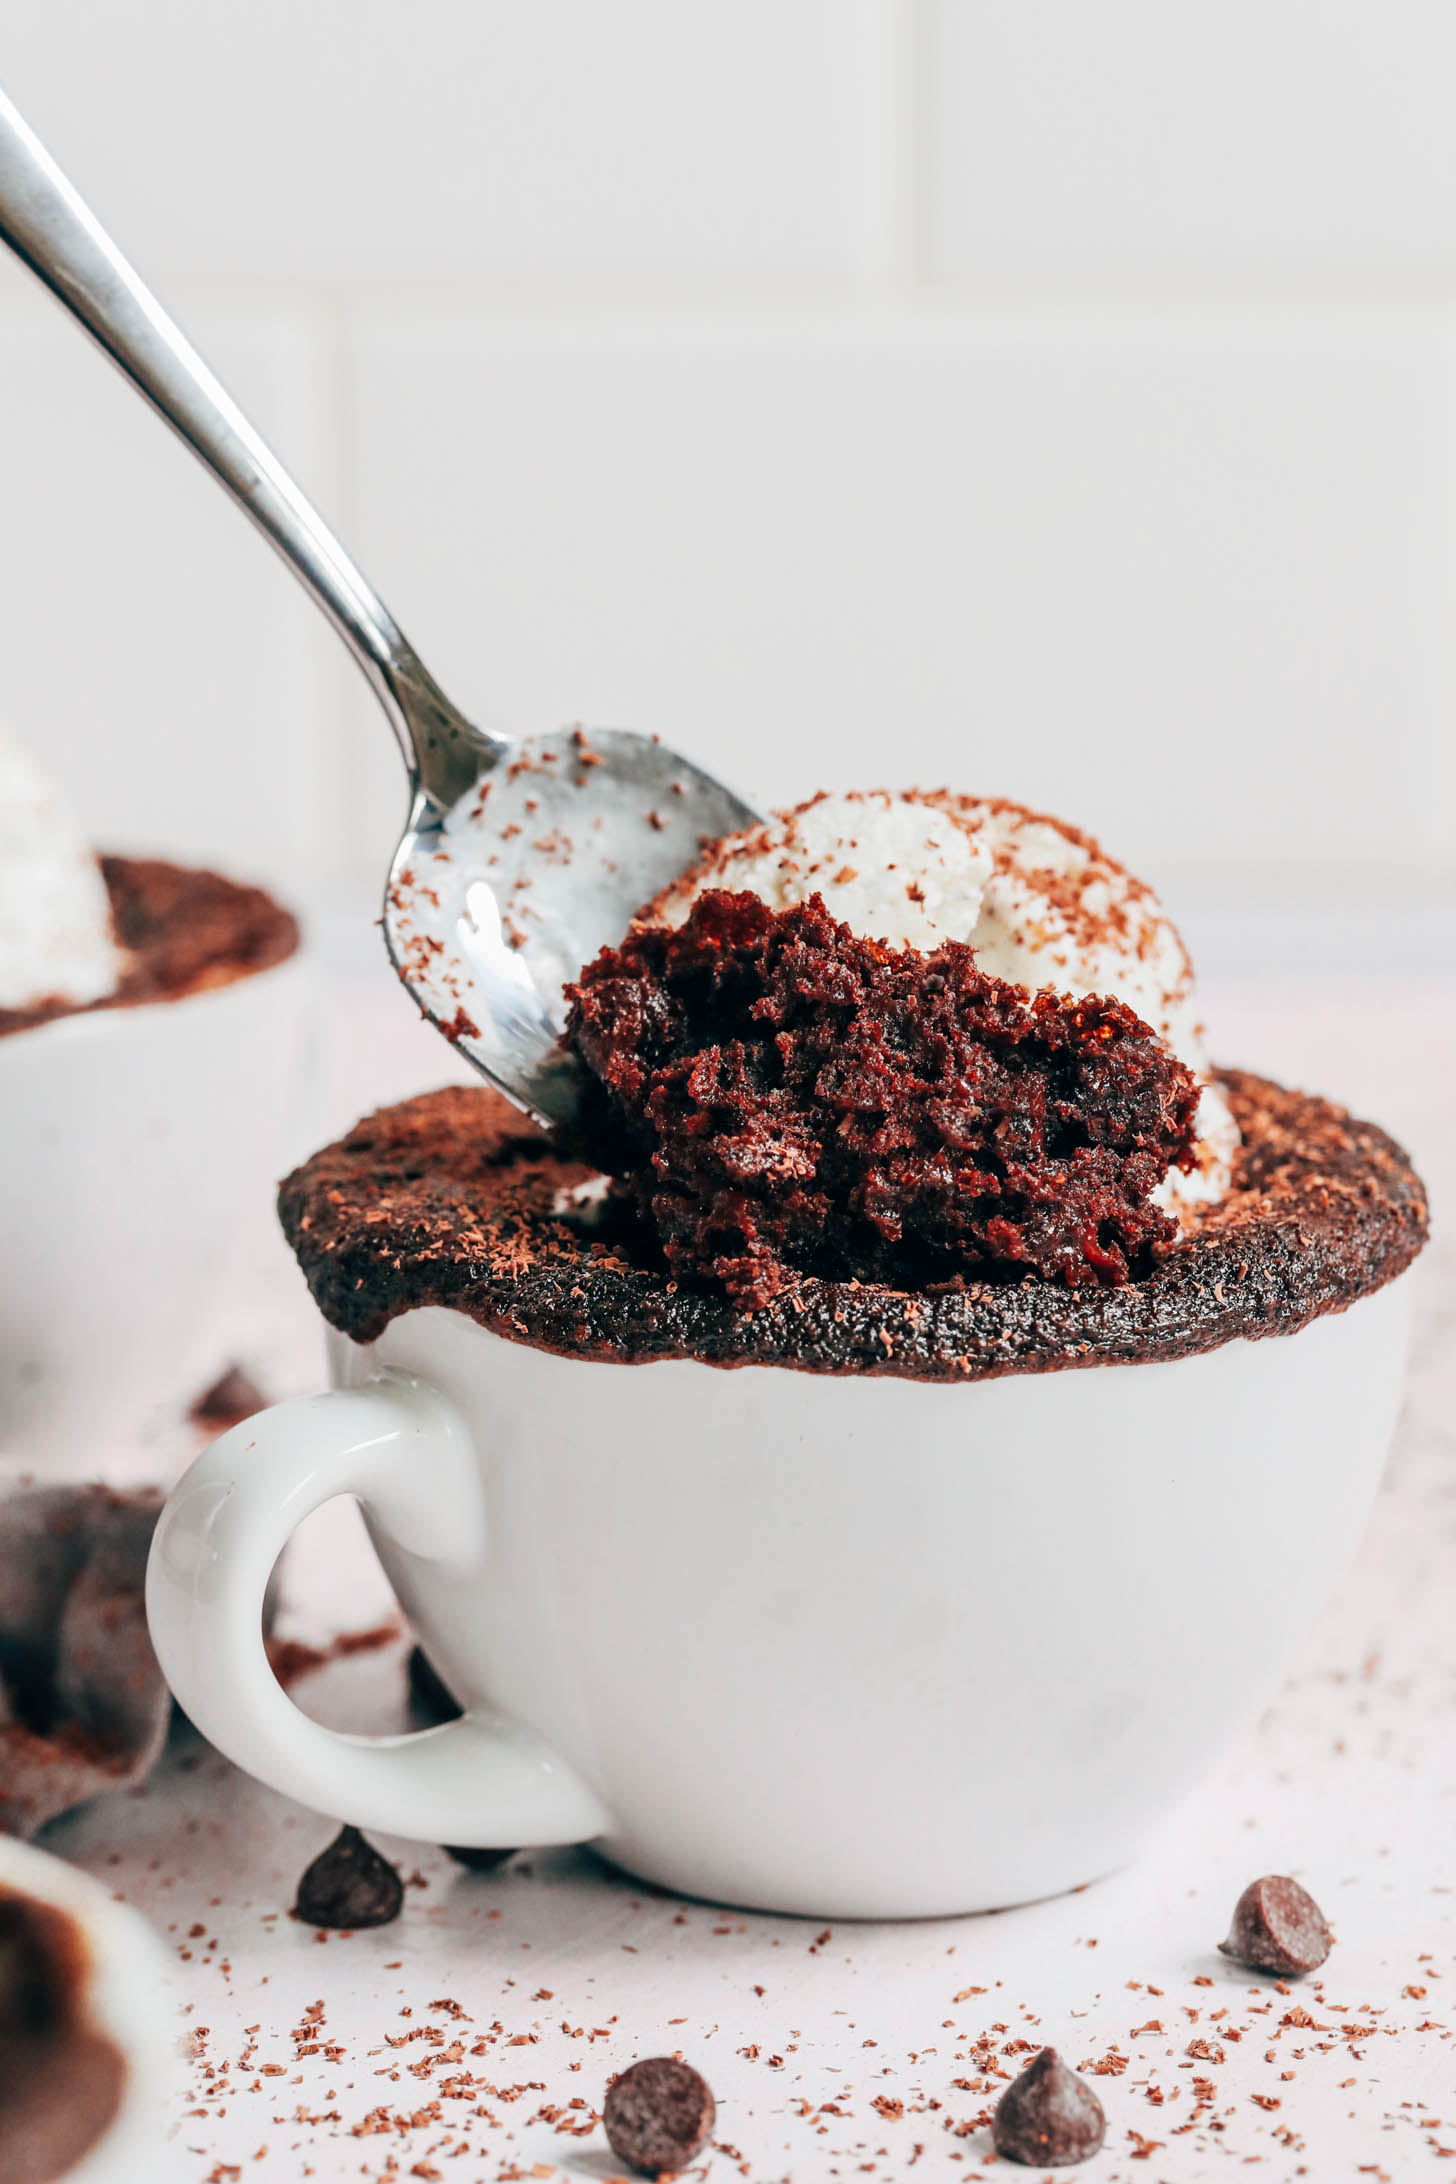 Scooping out a bite of gluten-free chocolate cake from a mug